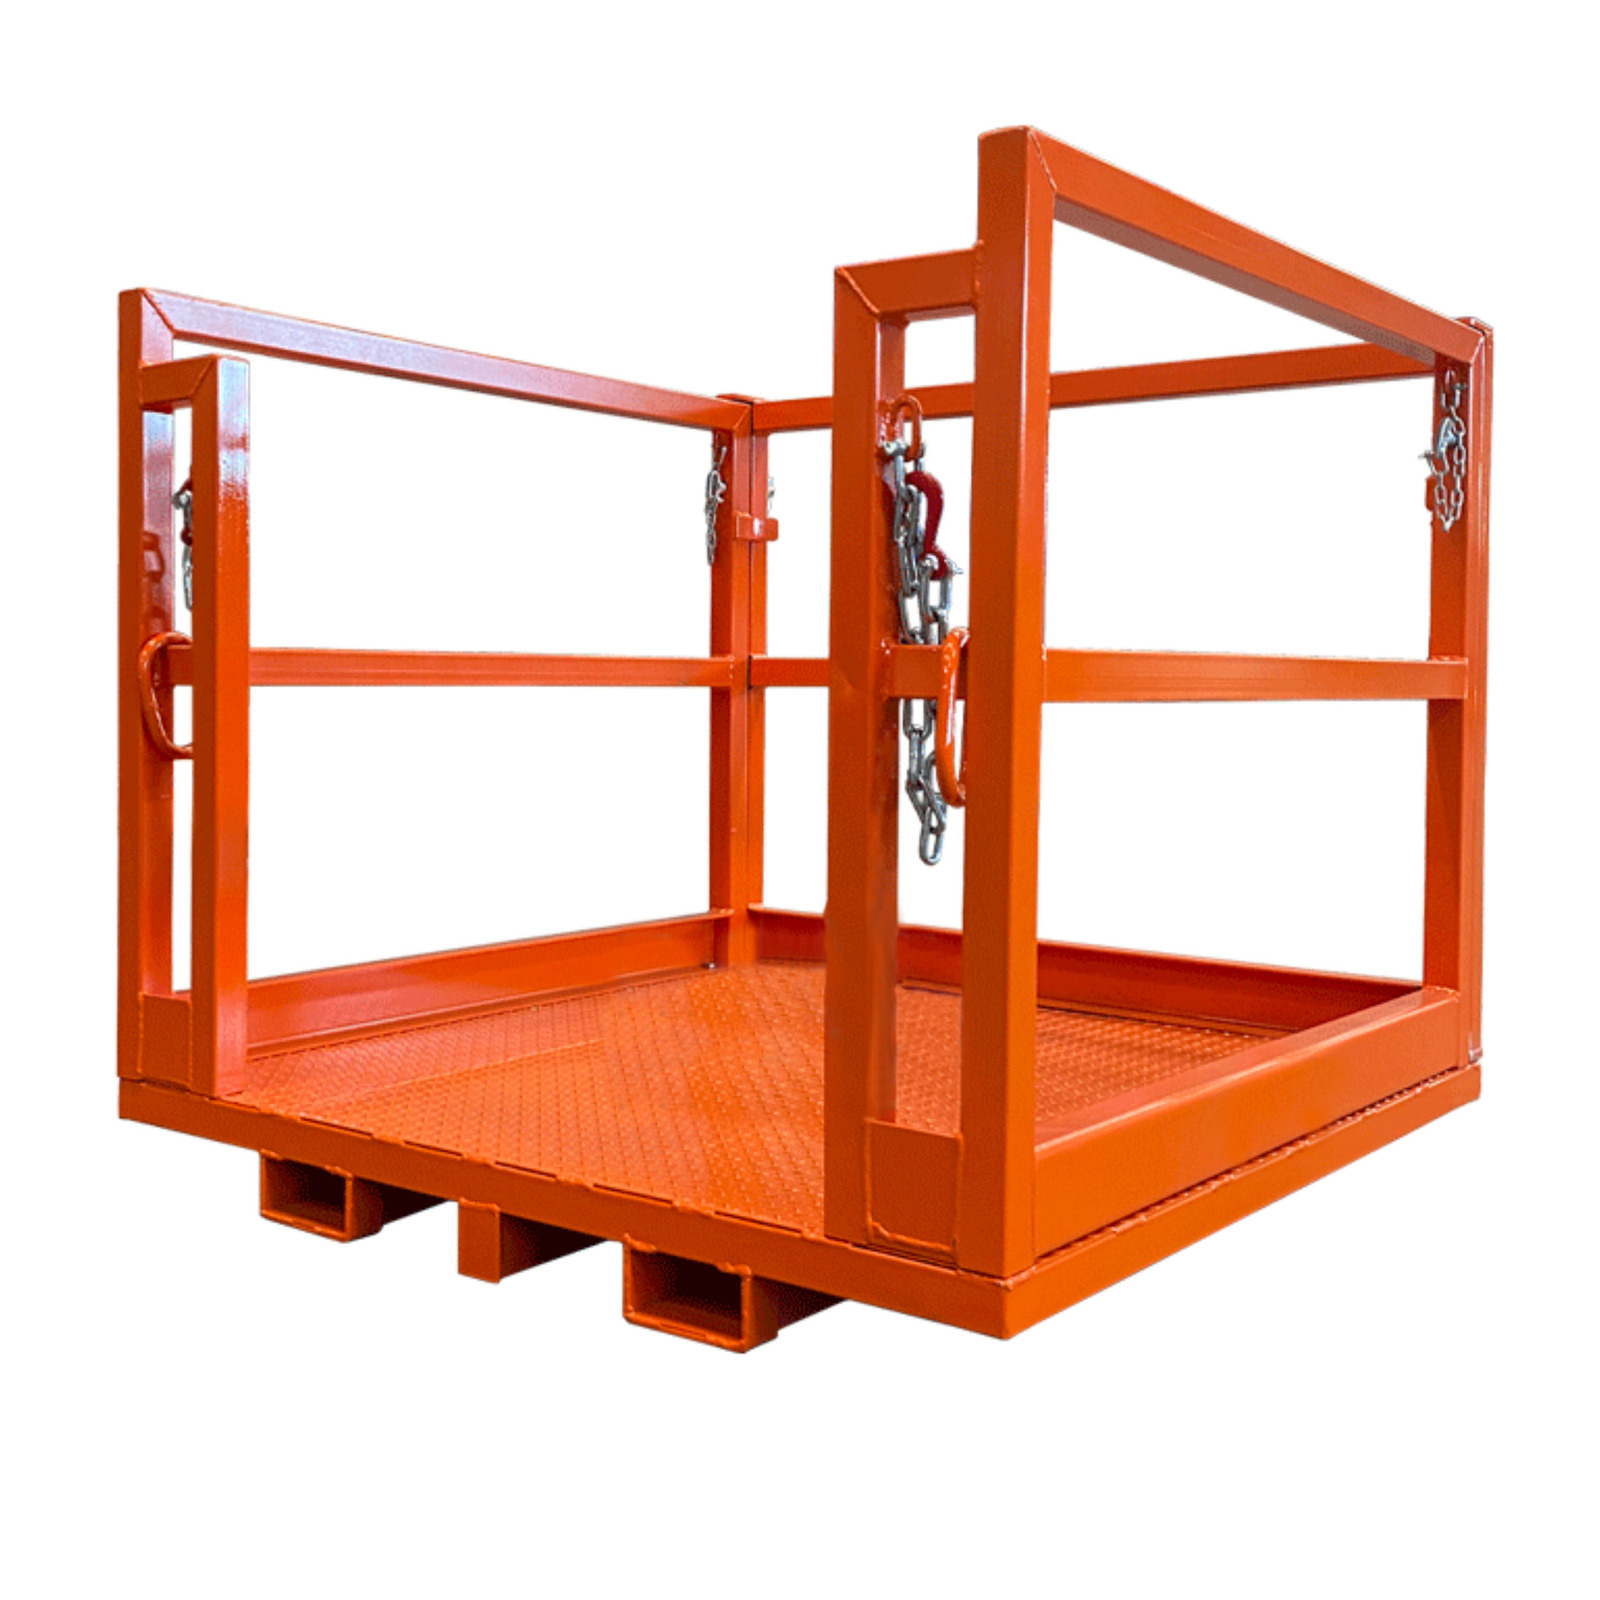 Order Picking Cage (with removable back)